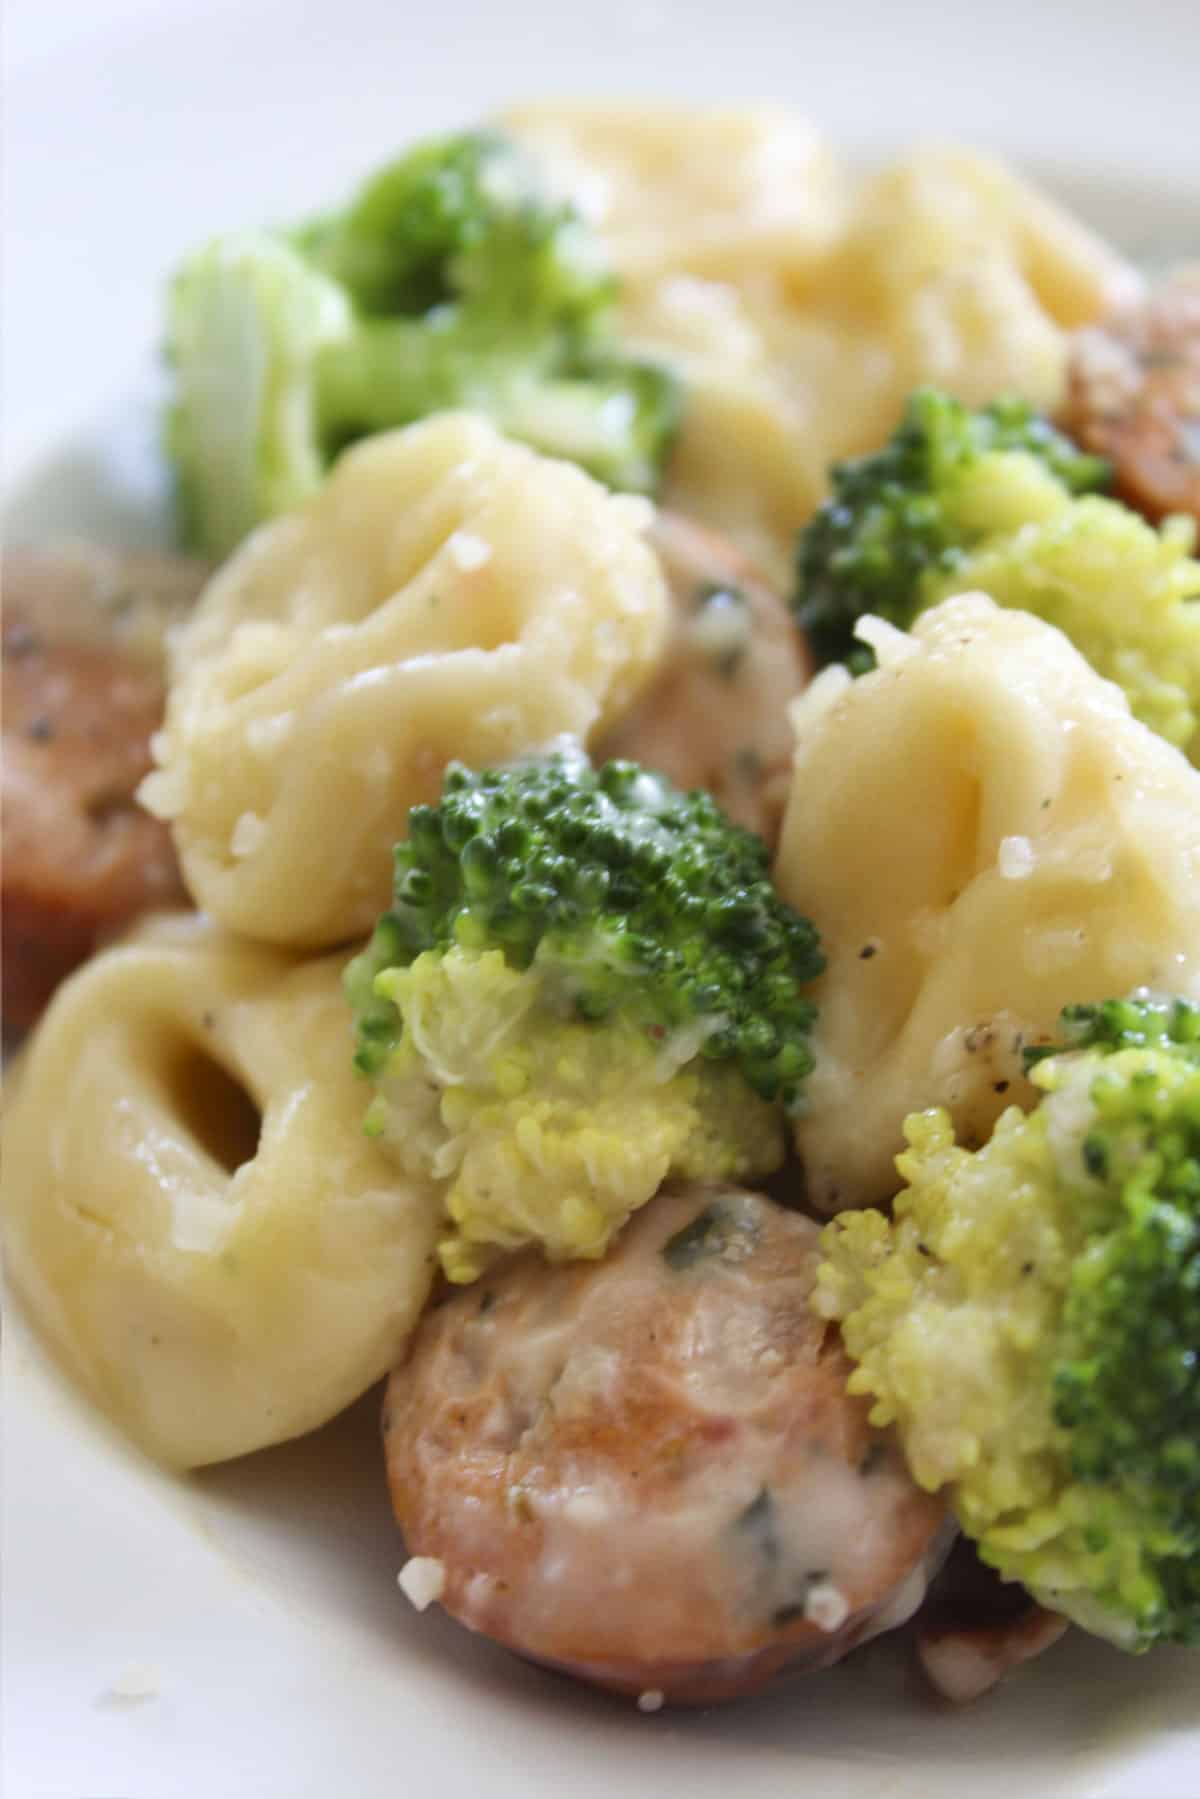 Sausage and Tortellini Skillet with broccoli served on a white plate.